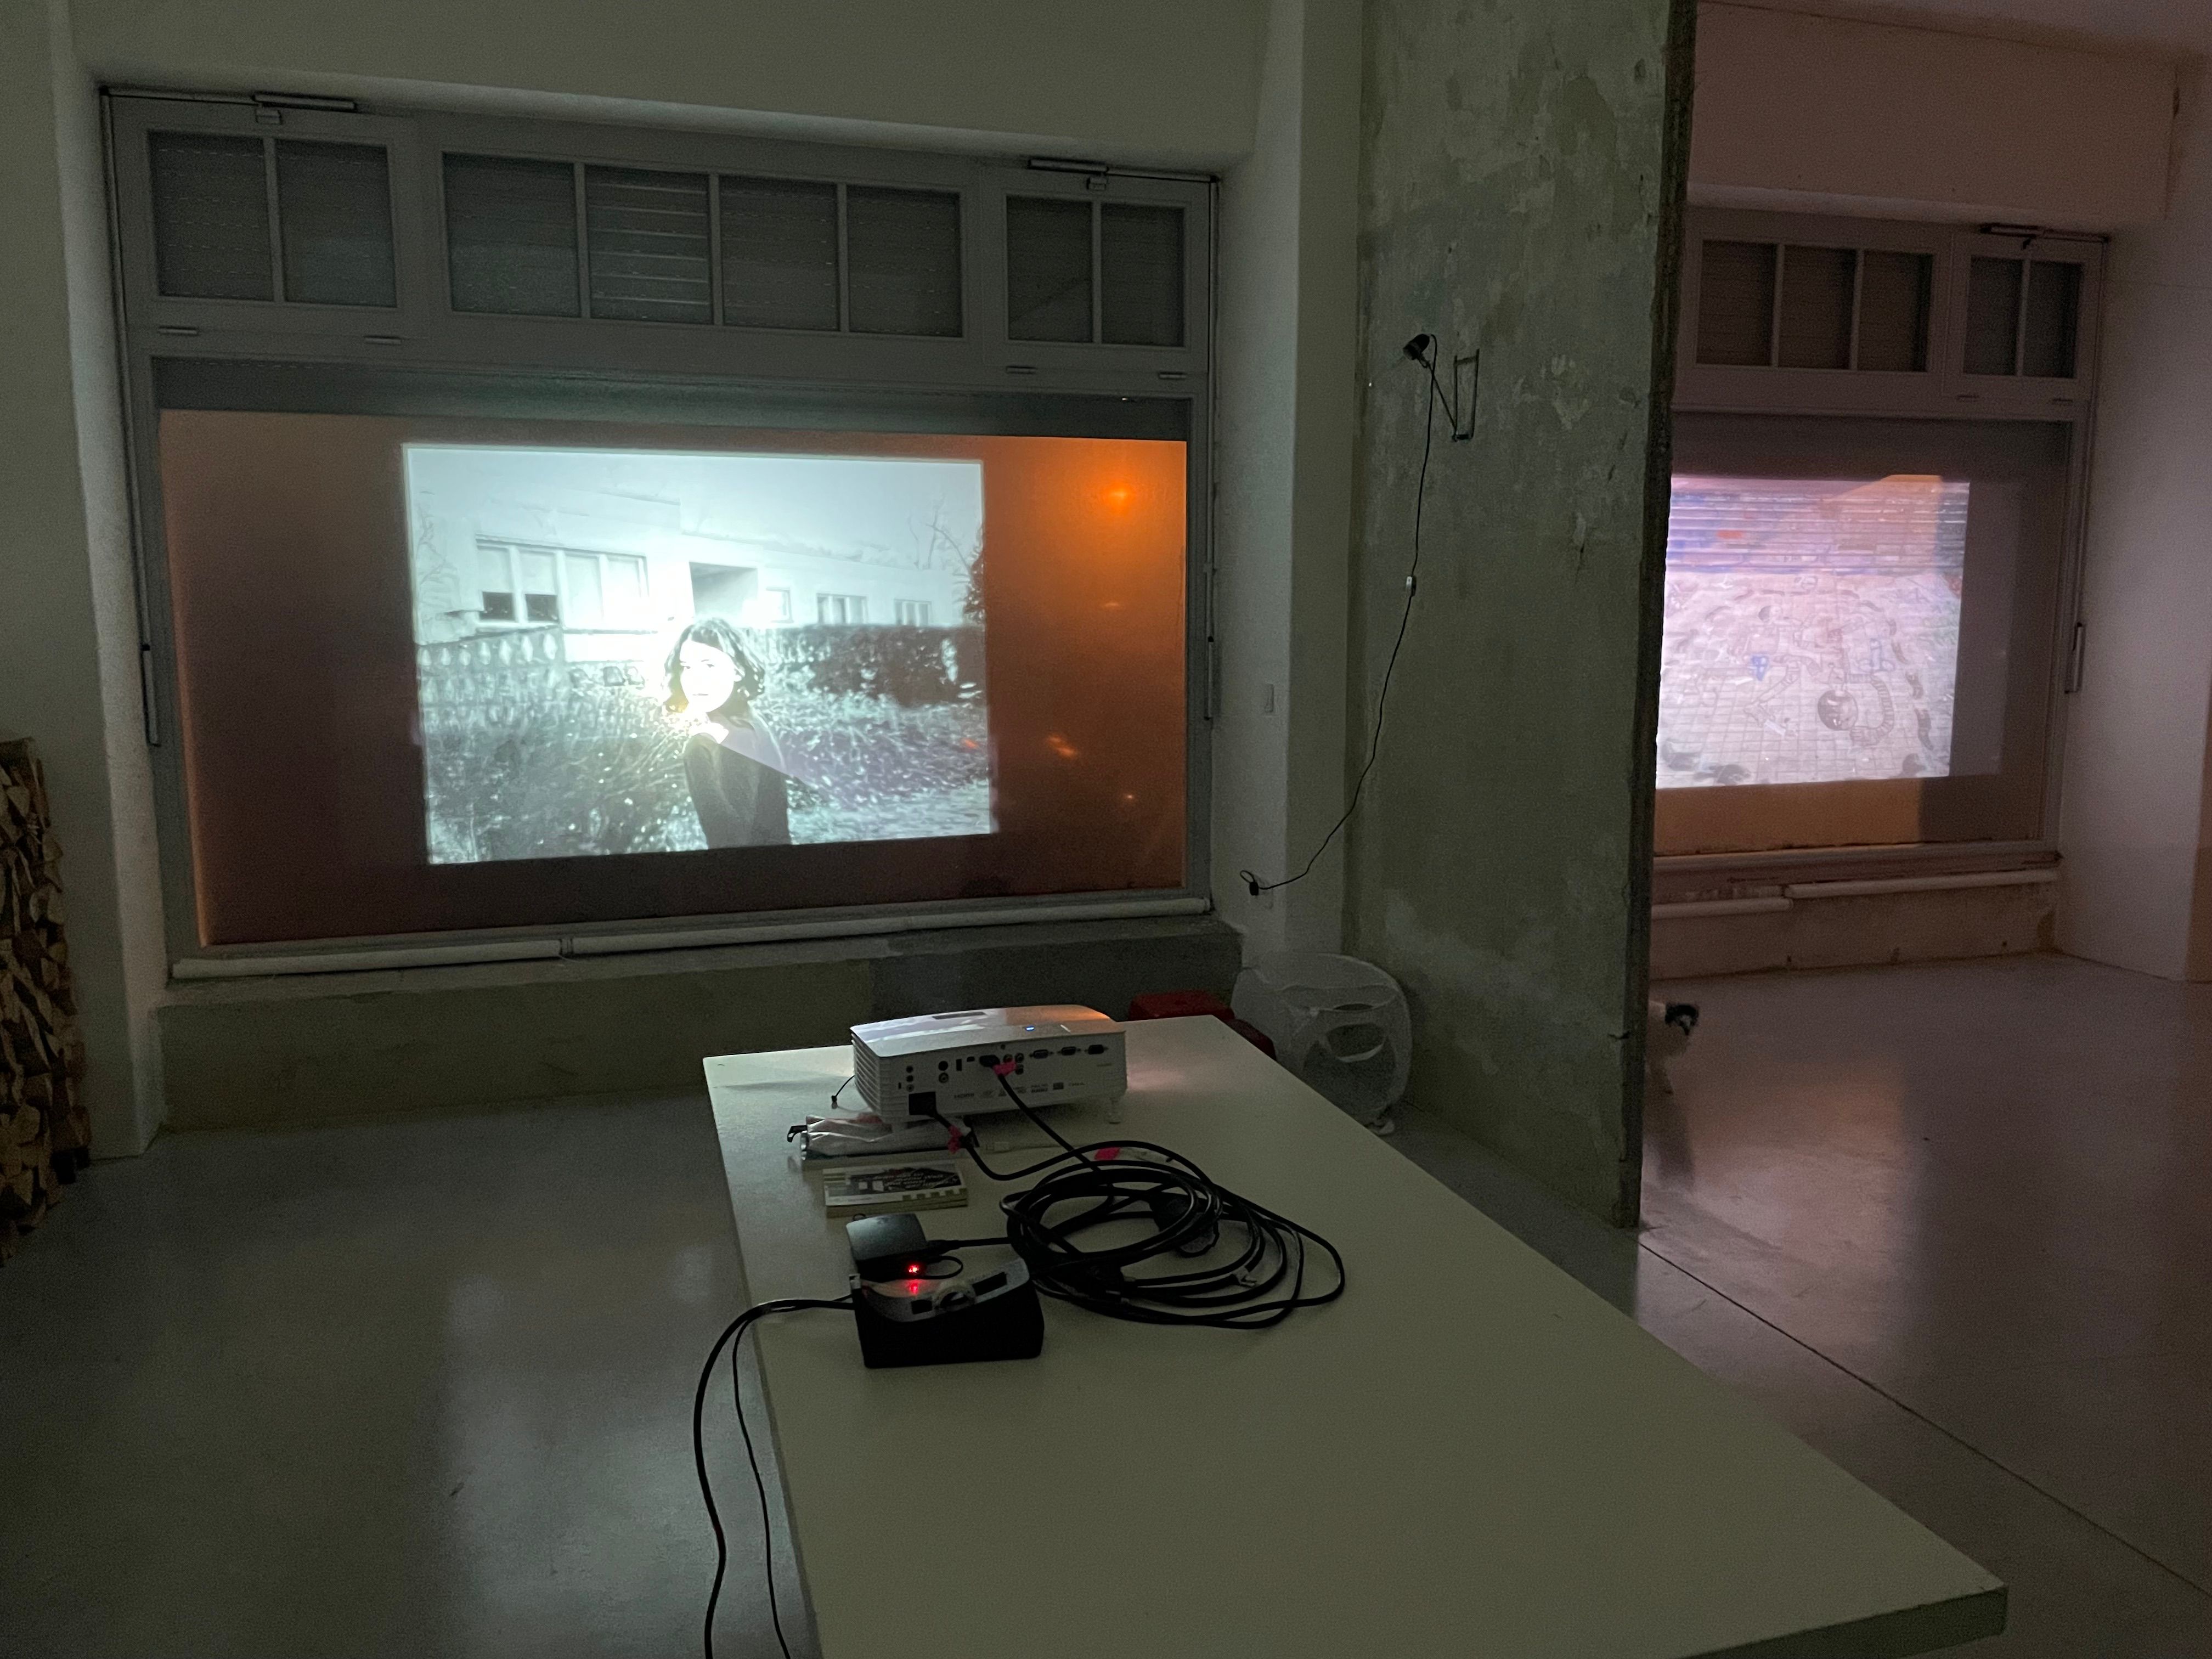 A projector and two images, taken from the inside of the building.